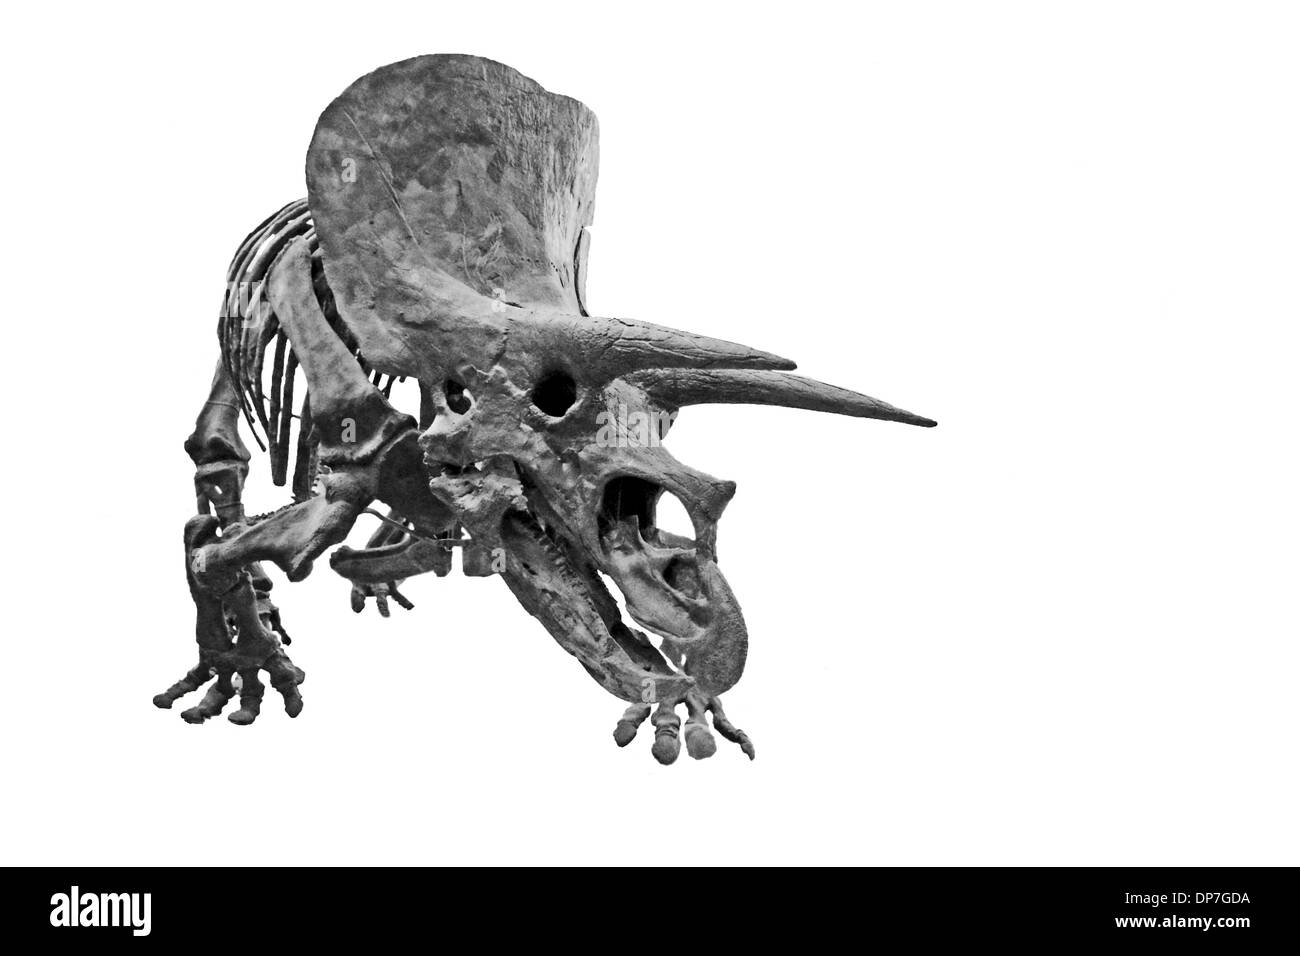 The fossilized bones of a Triceratops, isolated on to a white background. Stock Photo